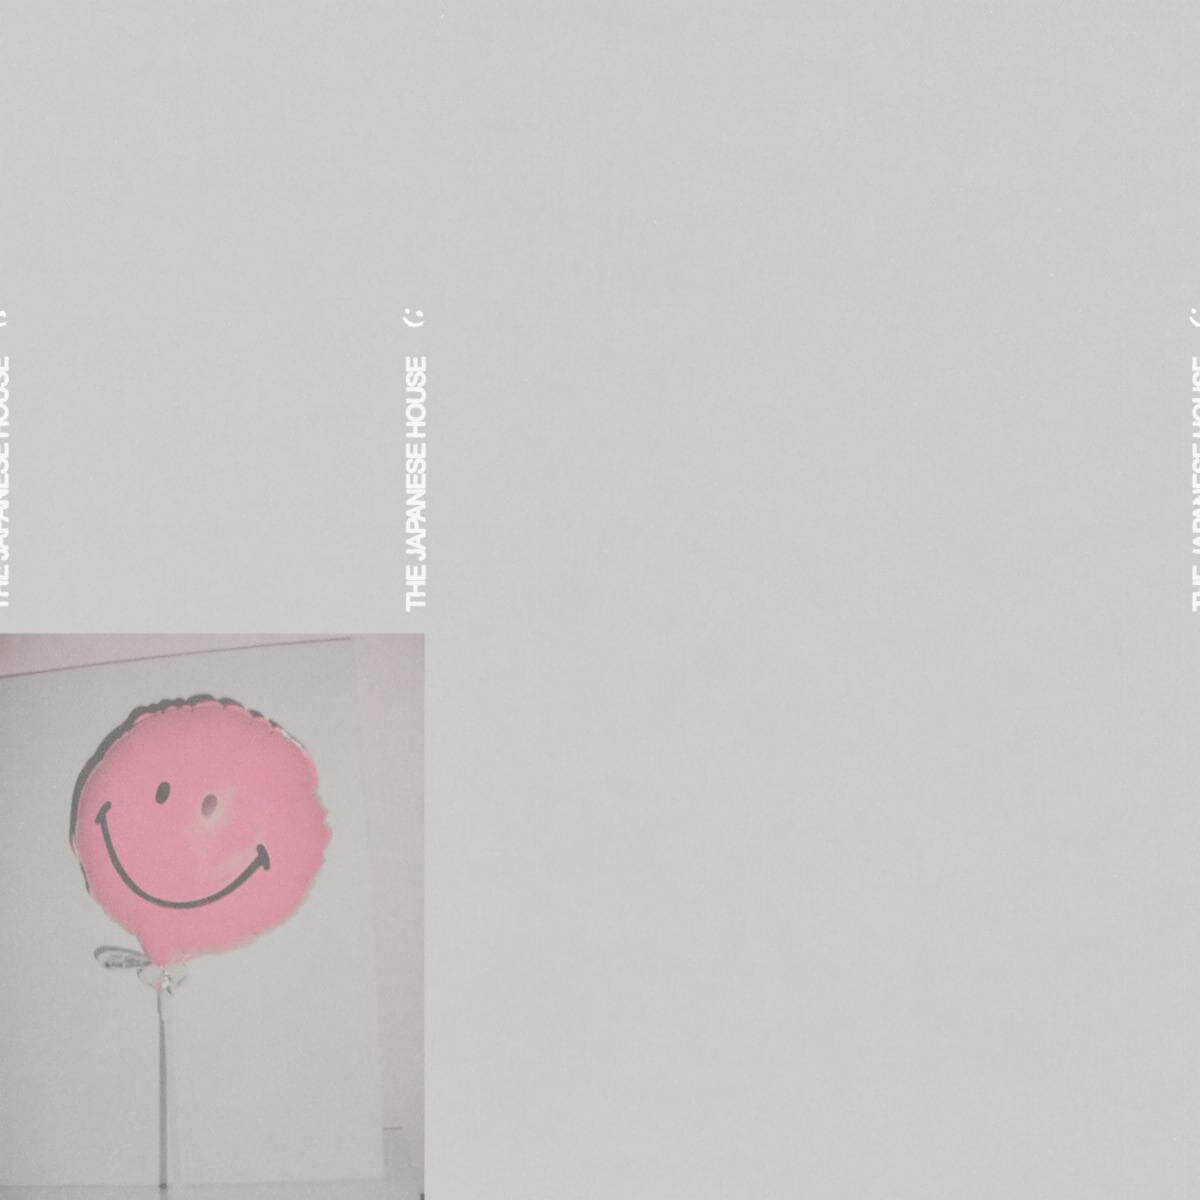 The Japanese House has dropped new single “:)” aka Smiley Face. The track was a collaboration with George Daniel and Chloe Kraemer